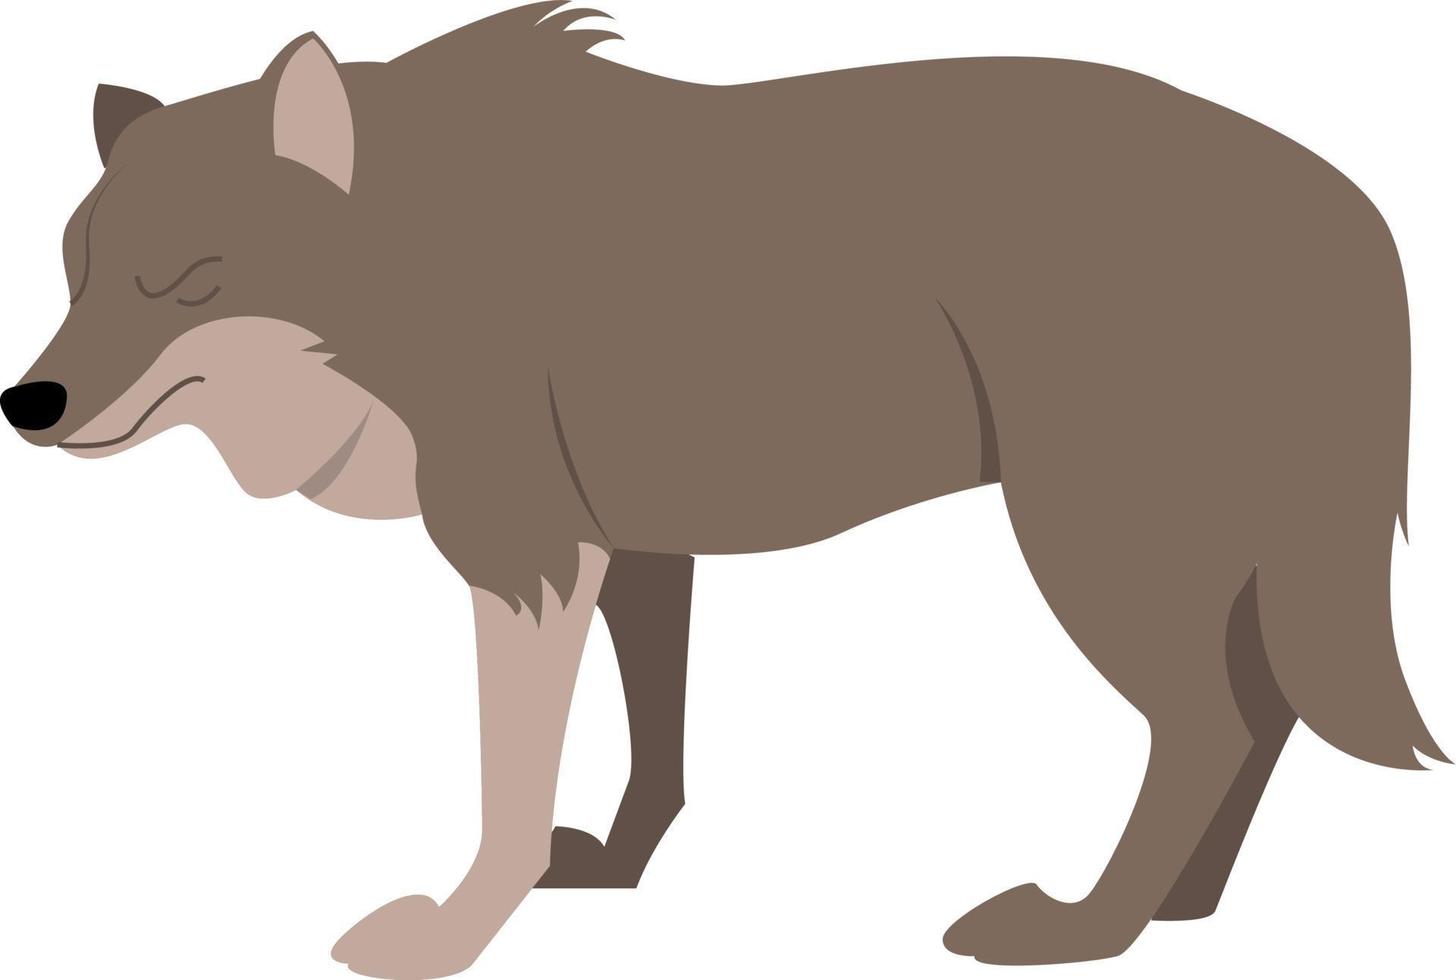 Fat wolf, illustration, vector on white background.